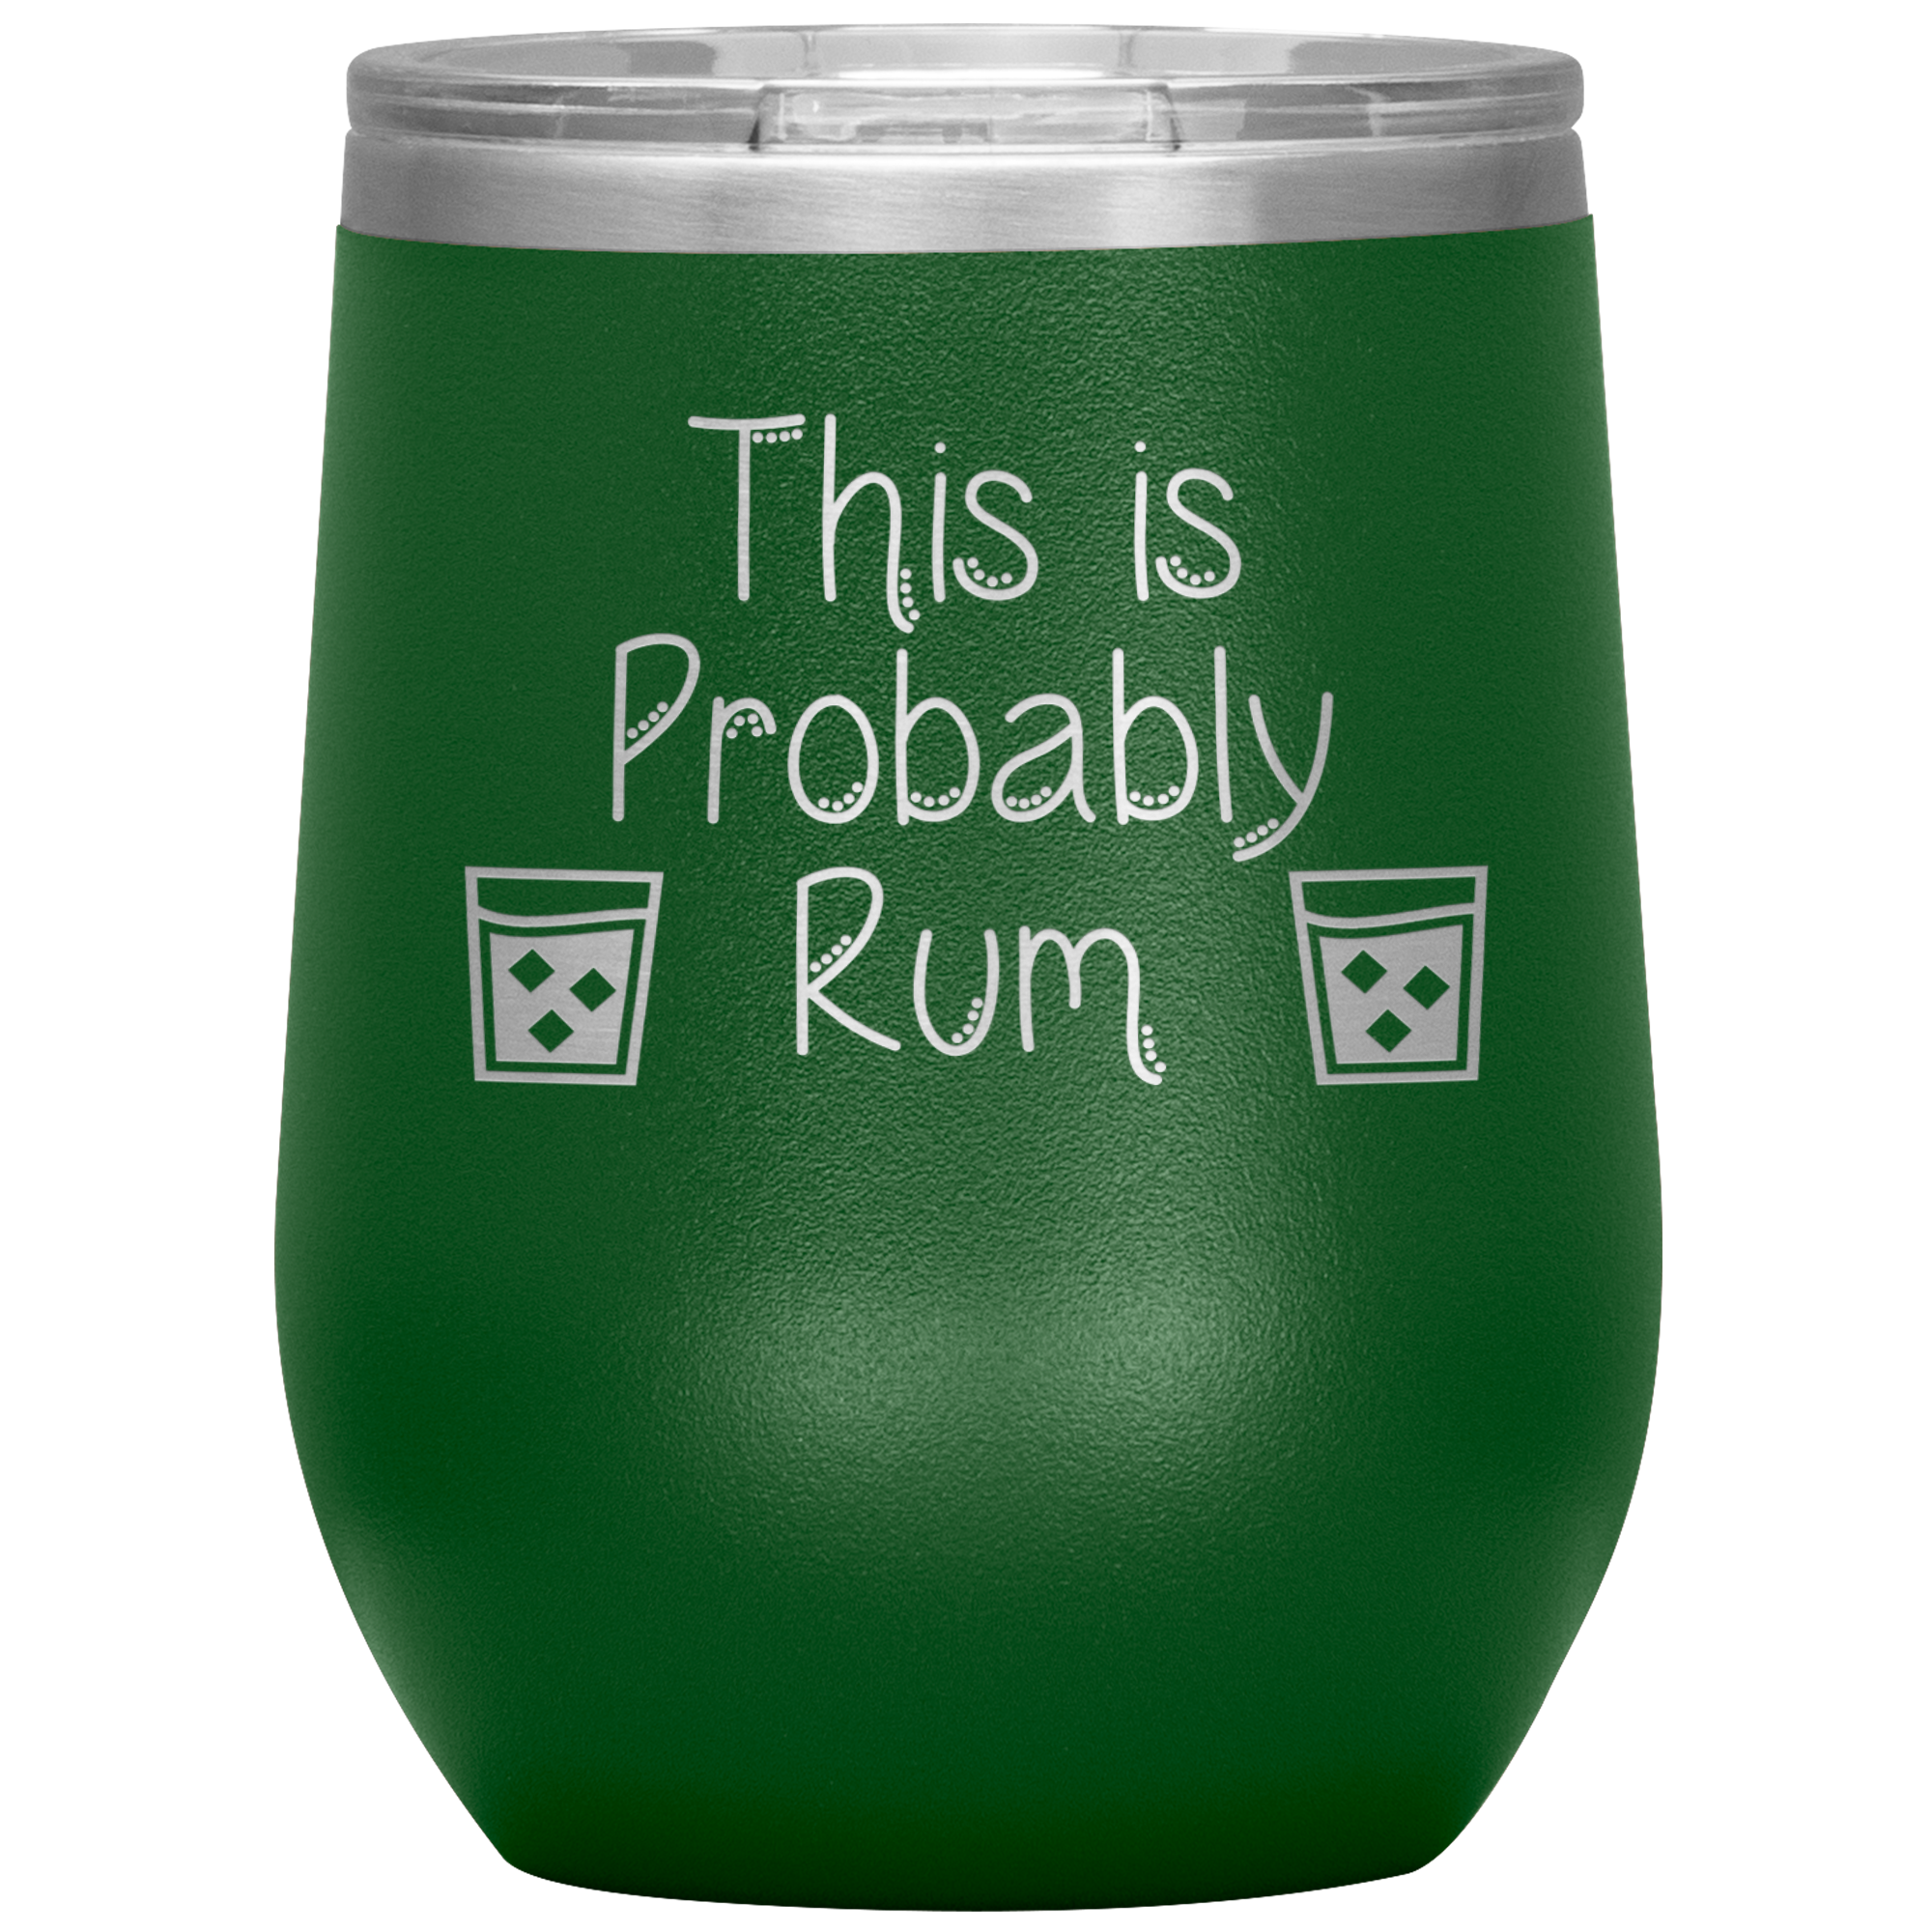 This is Probably Rum- Tumbler